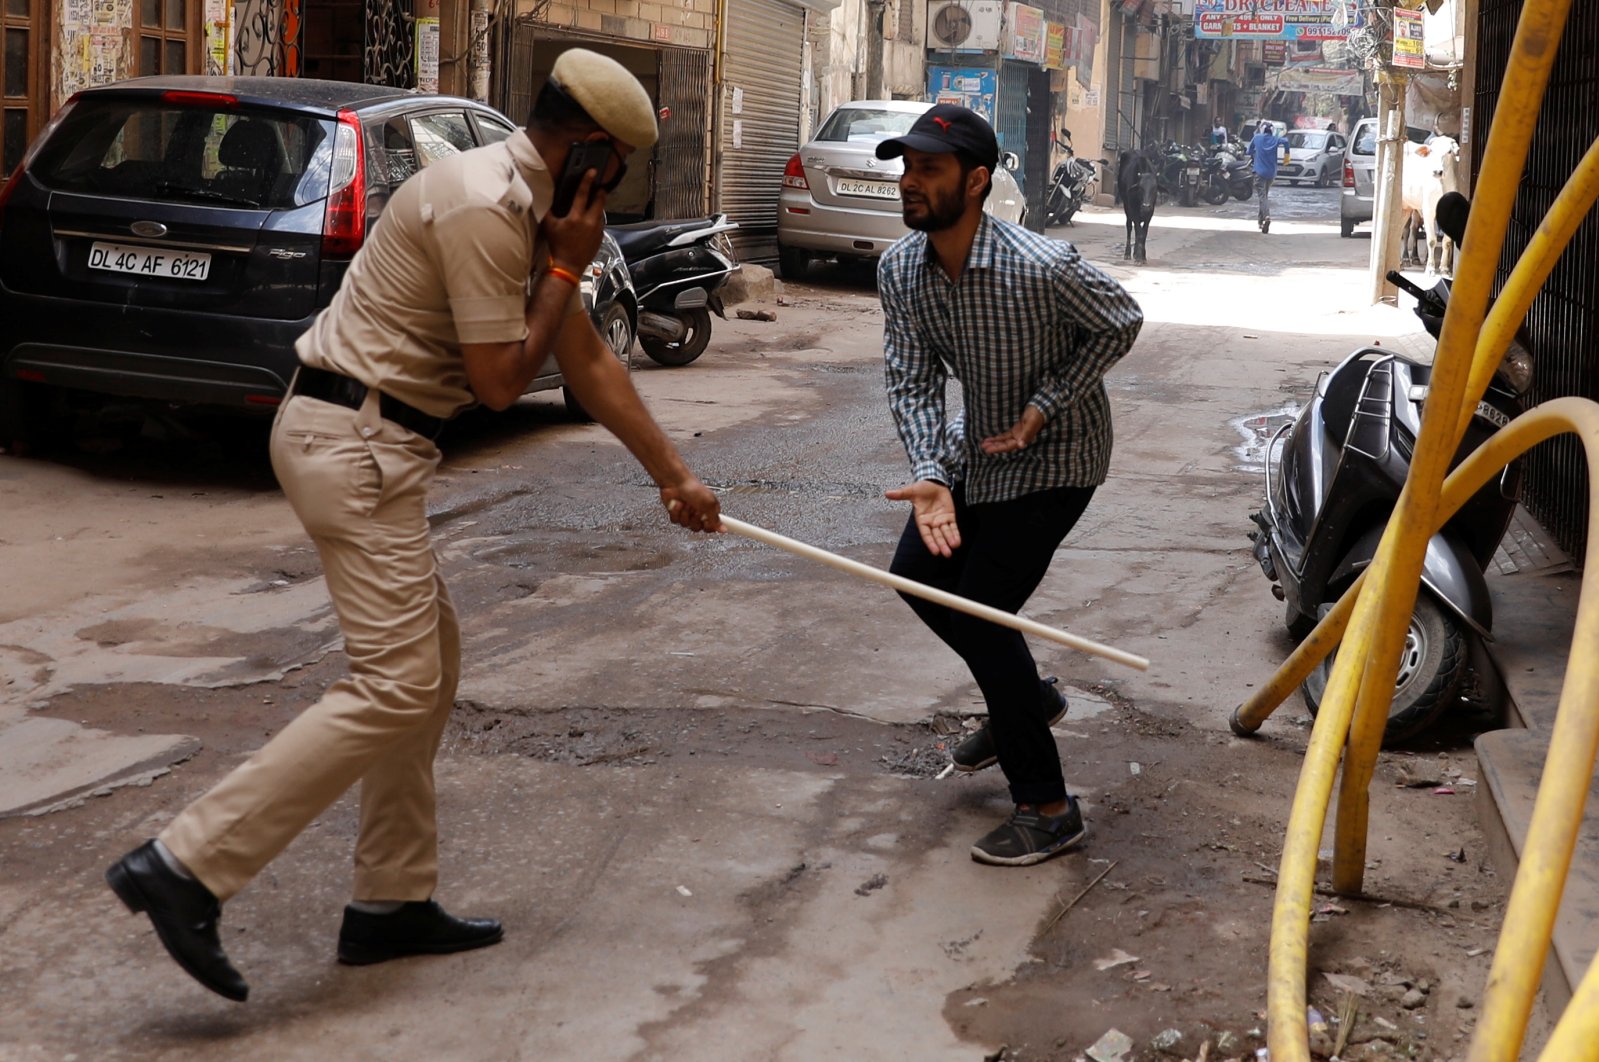 A police officer wields his baton against a man as a punishment for breaking the lockdown rules, New Delhi, Wednesday, March 25, 2020. (Reuters Photo)